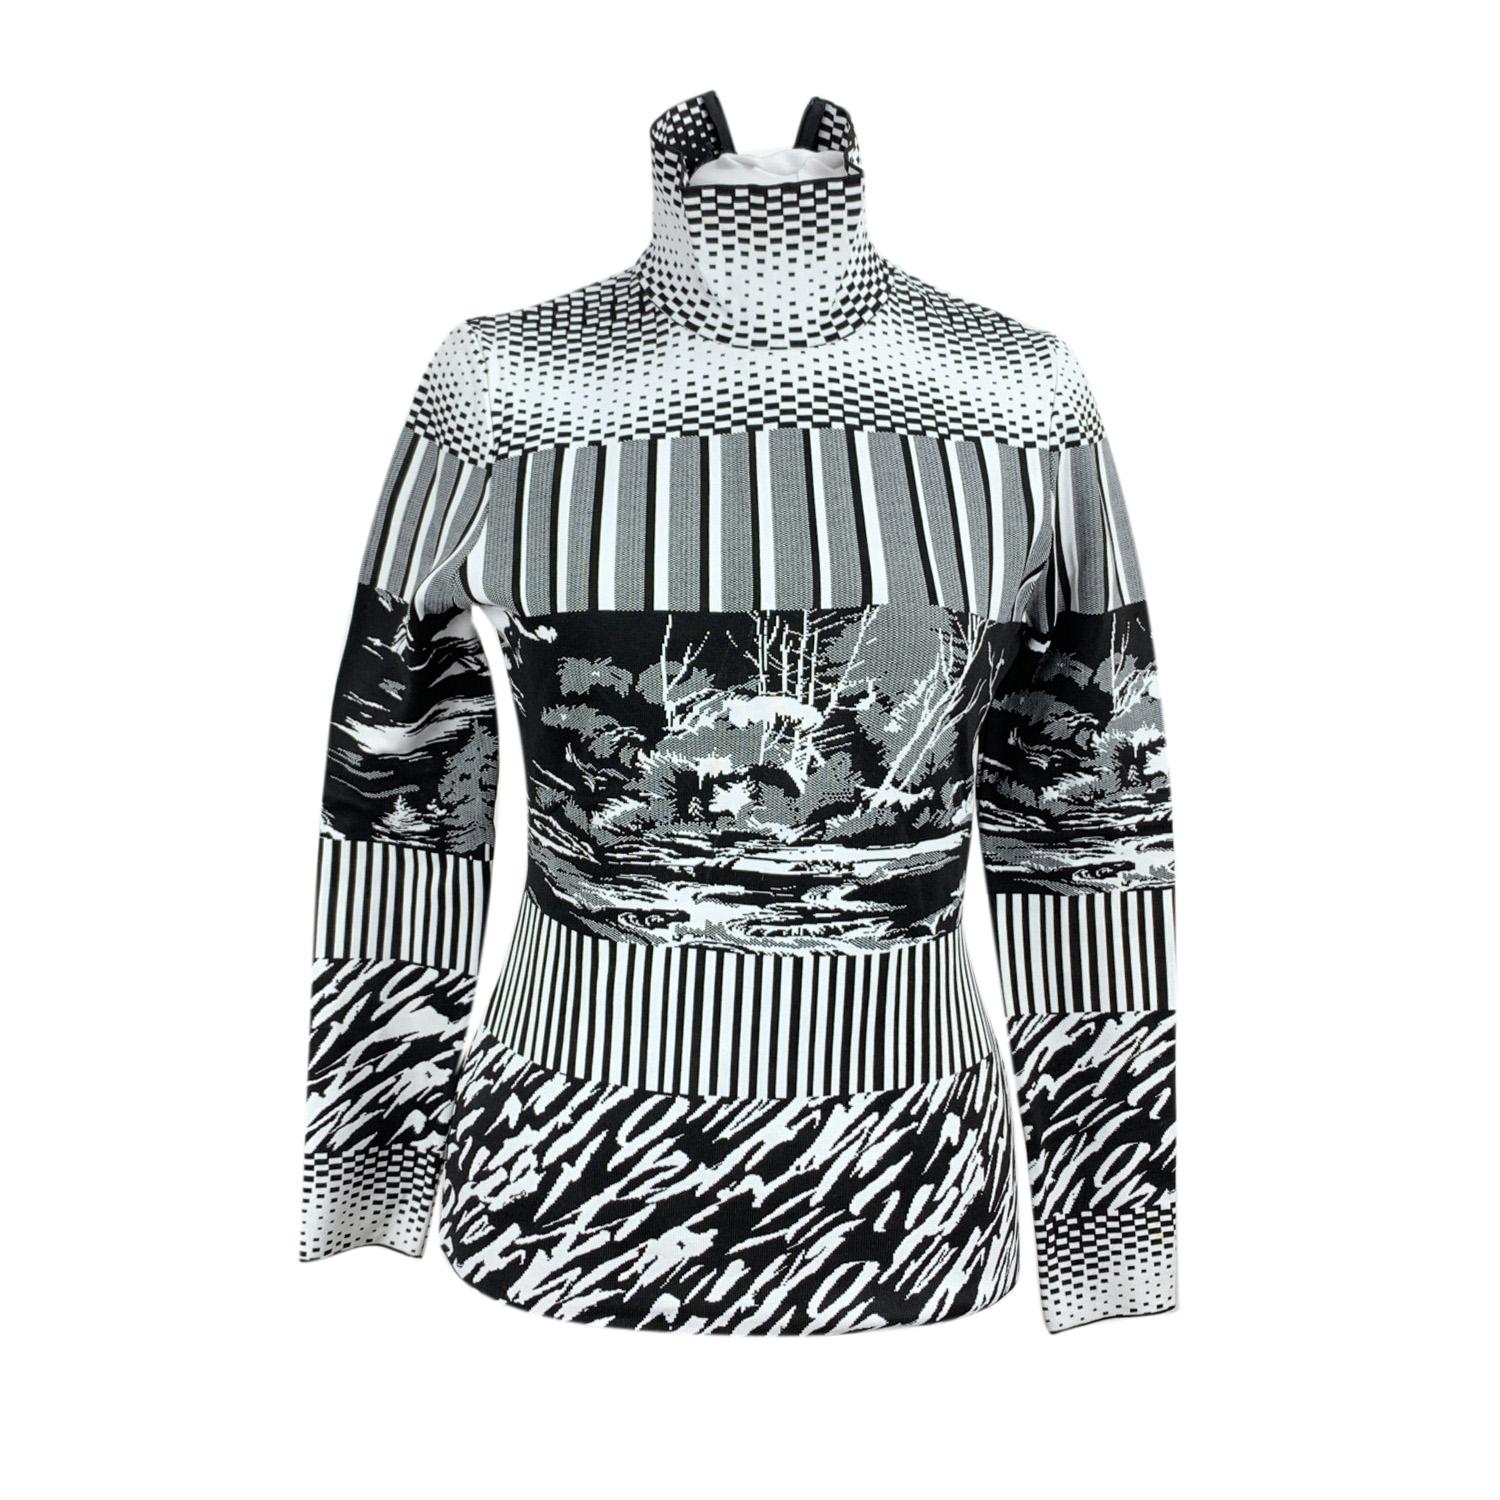 Black and white Balenciaga all-over pattern turtleneck jumper. It features a turtleneck, long sleeves, slim-fit and a rear zip. Composition: 100% Polyepropylene. Size: 38 FR (The size shown for this item is the size indicated by the designer on the